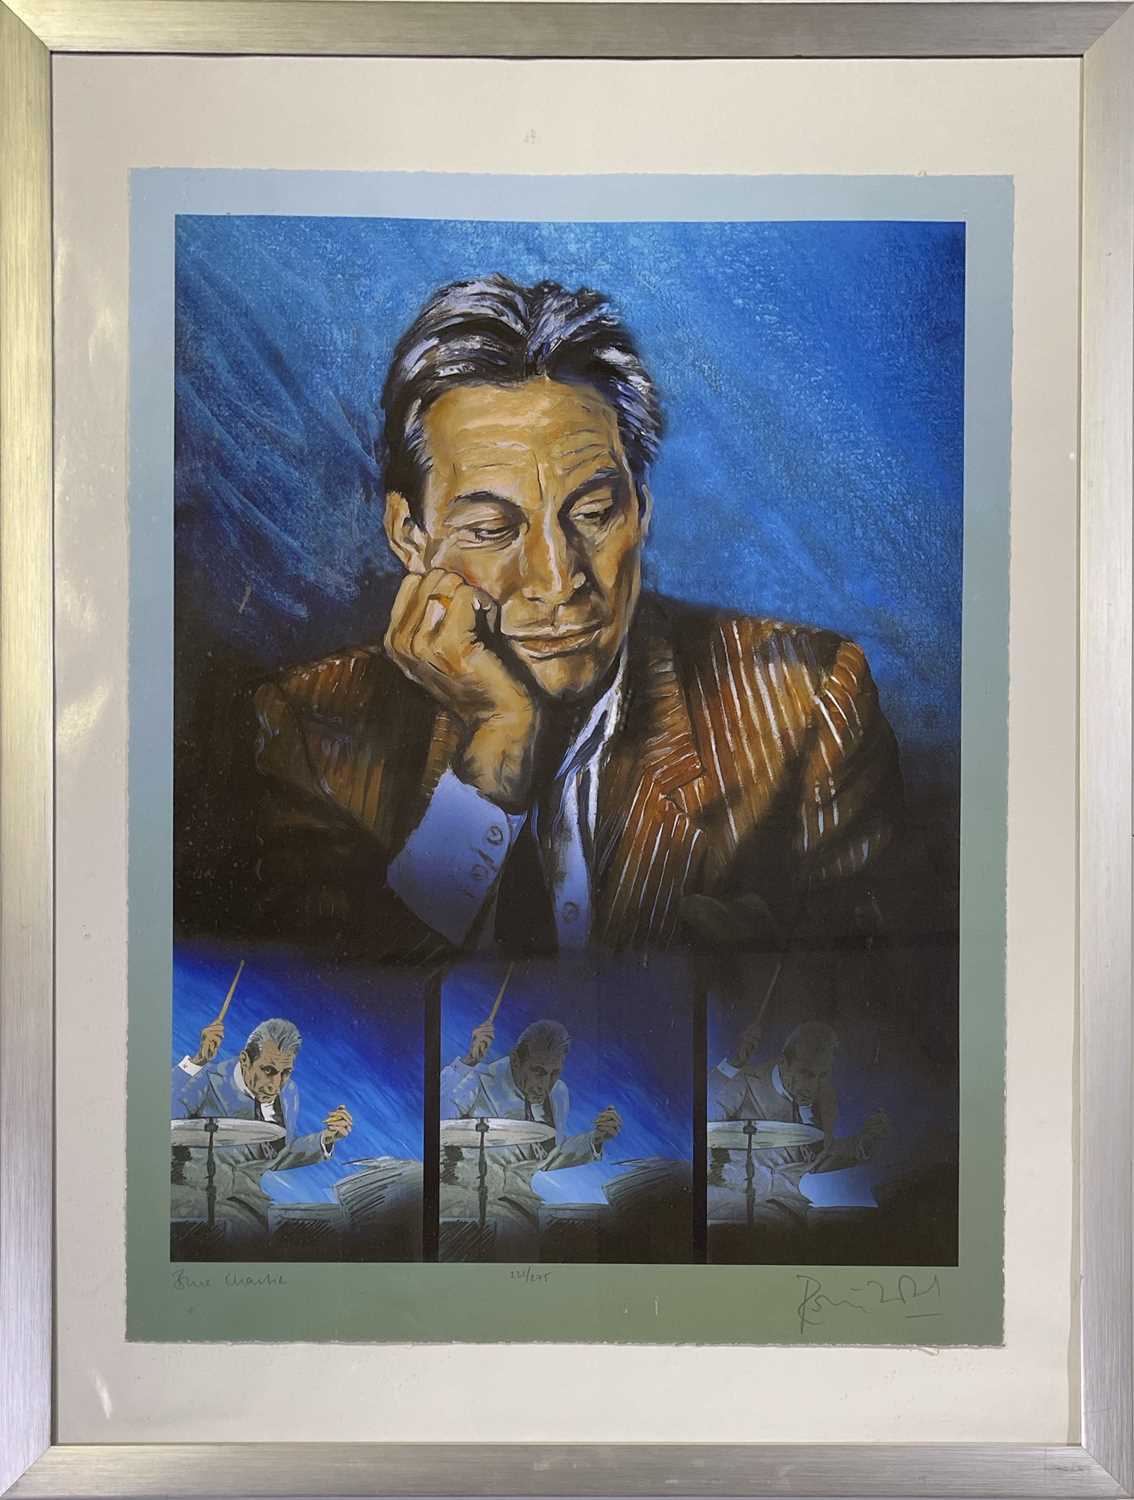 Lot 405 - THE ROLLING STONES - RONNIE WOOD SIGNED LIMITED EDITION PRINT - CHARLIE WATTS.